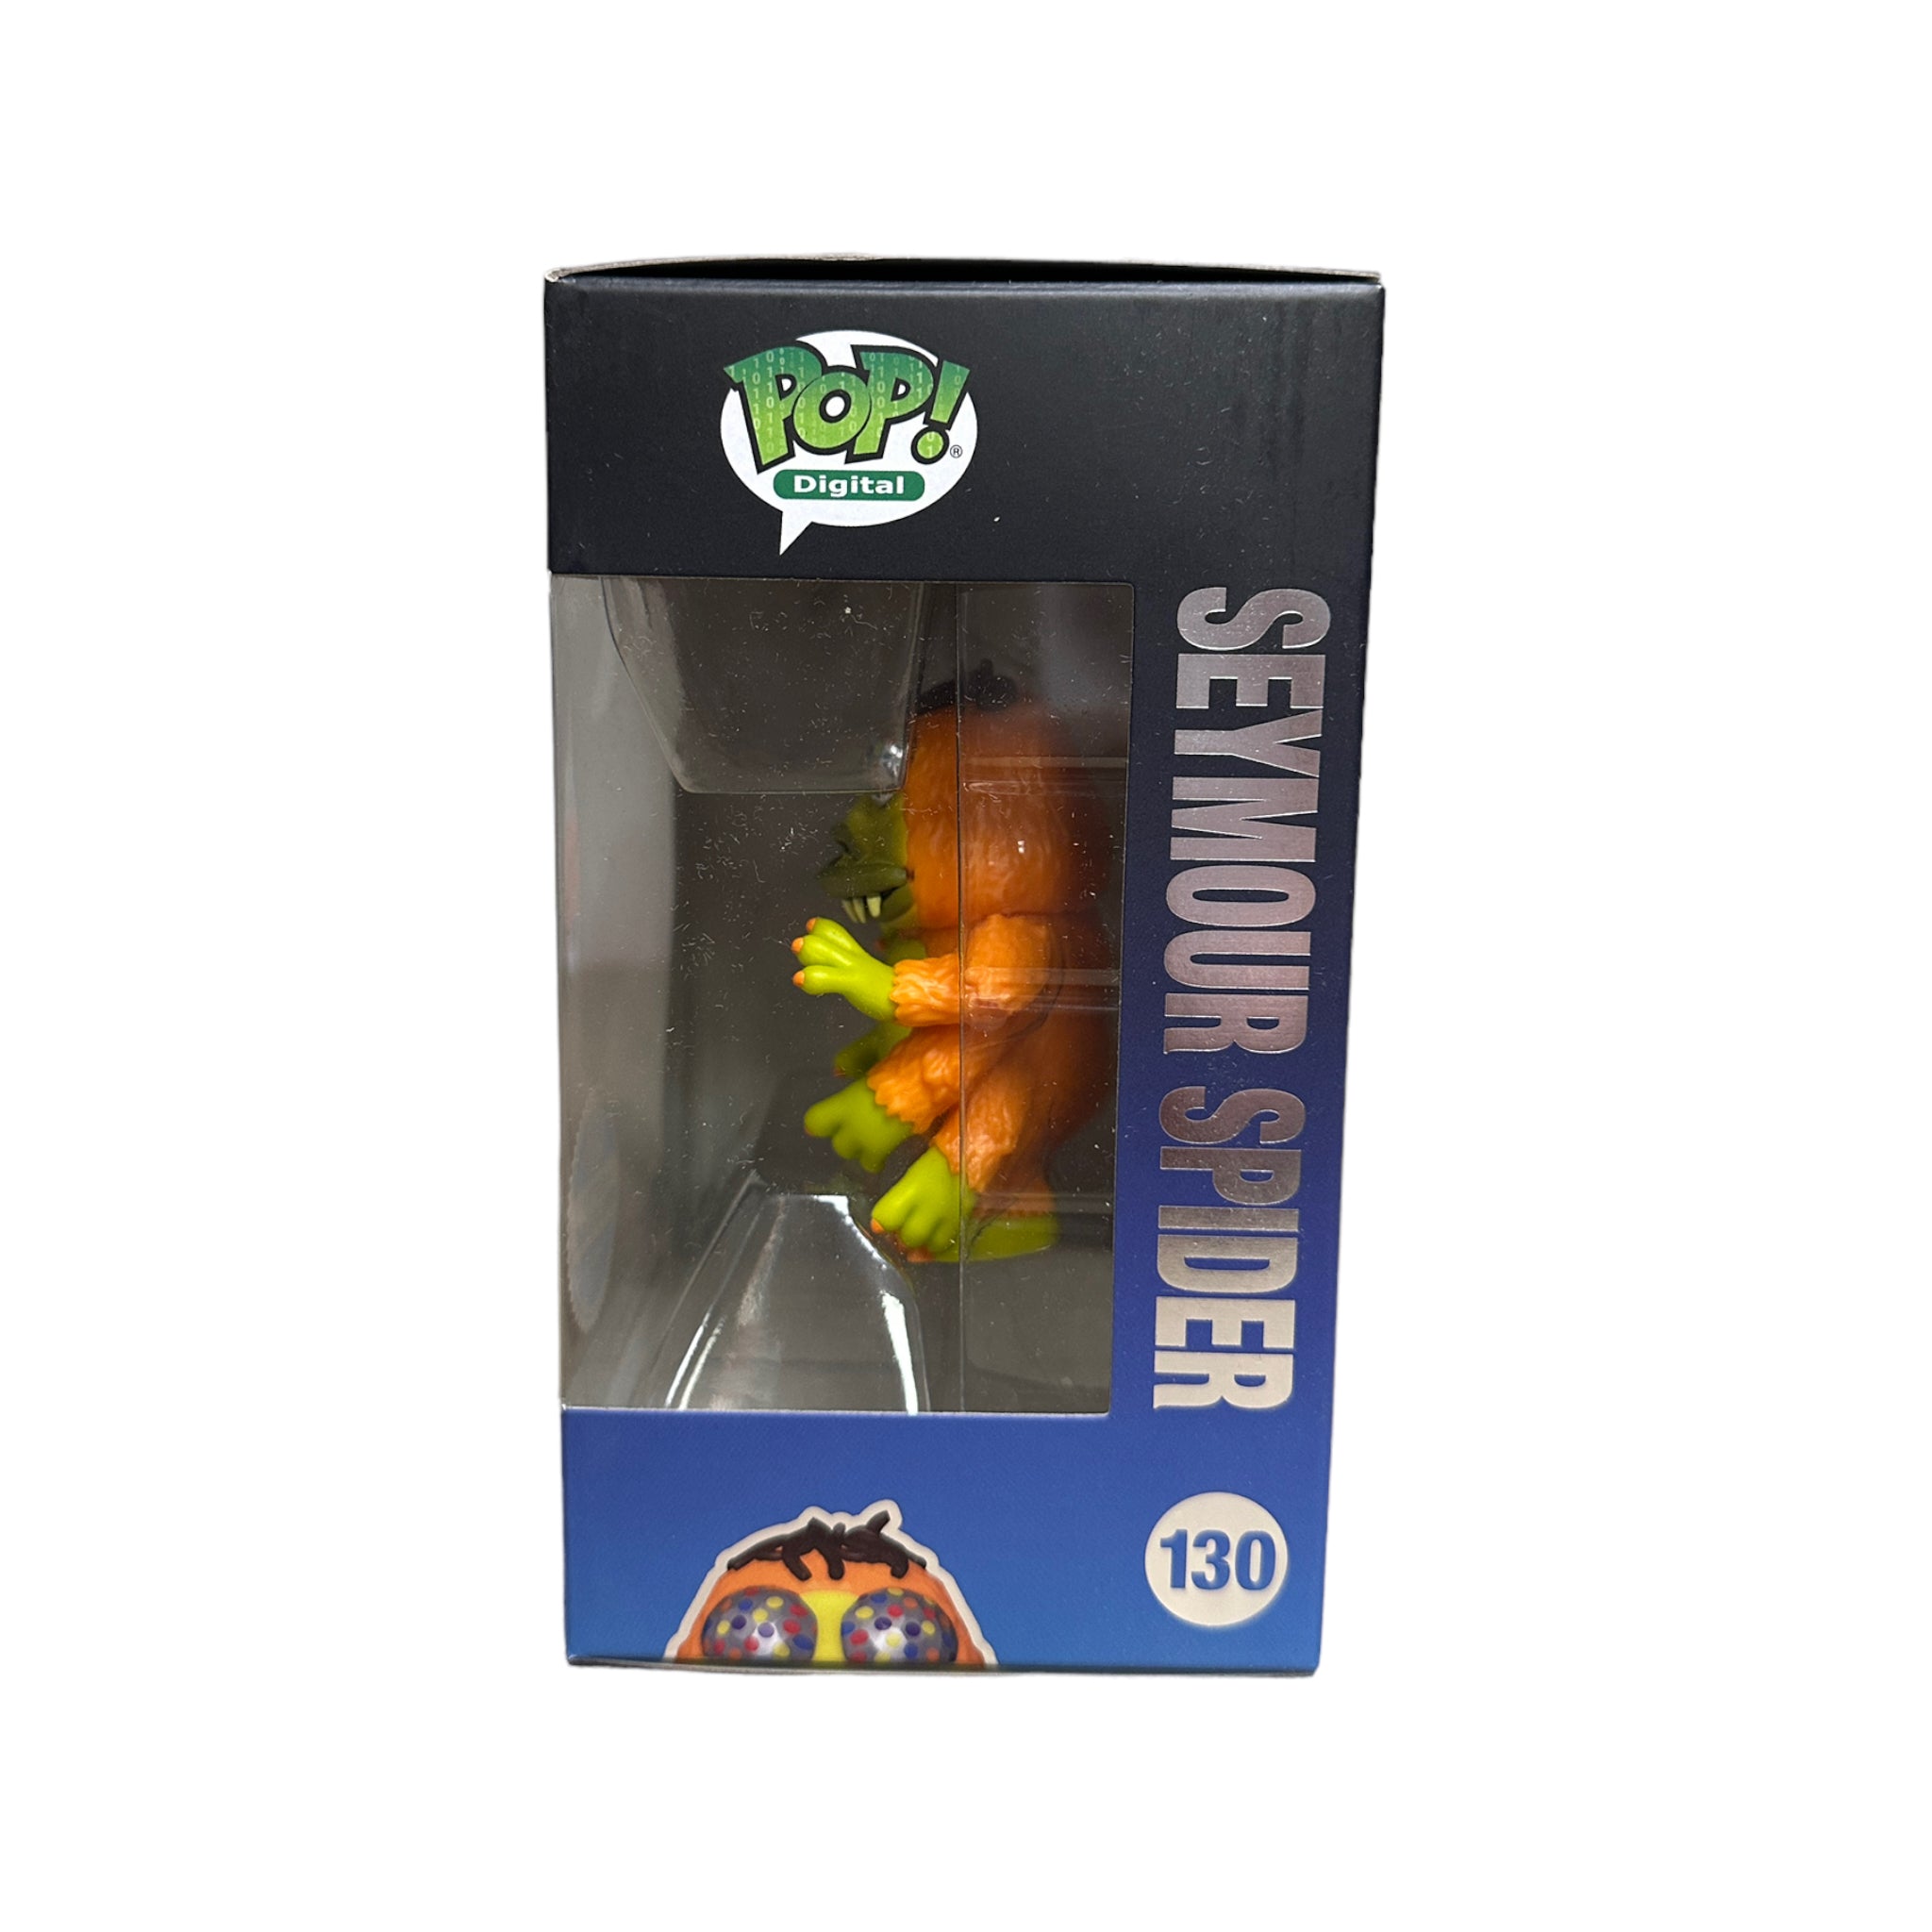 Seymour Spider #130 Funko Pop! - Sid & Marty Krofft Pictures - NFT Release Exclusive LE1400 Pcs - Condition 8.75/10